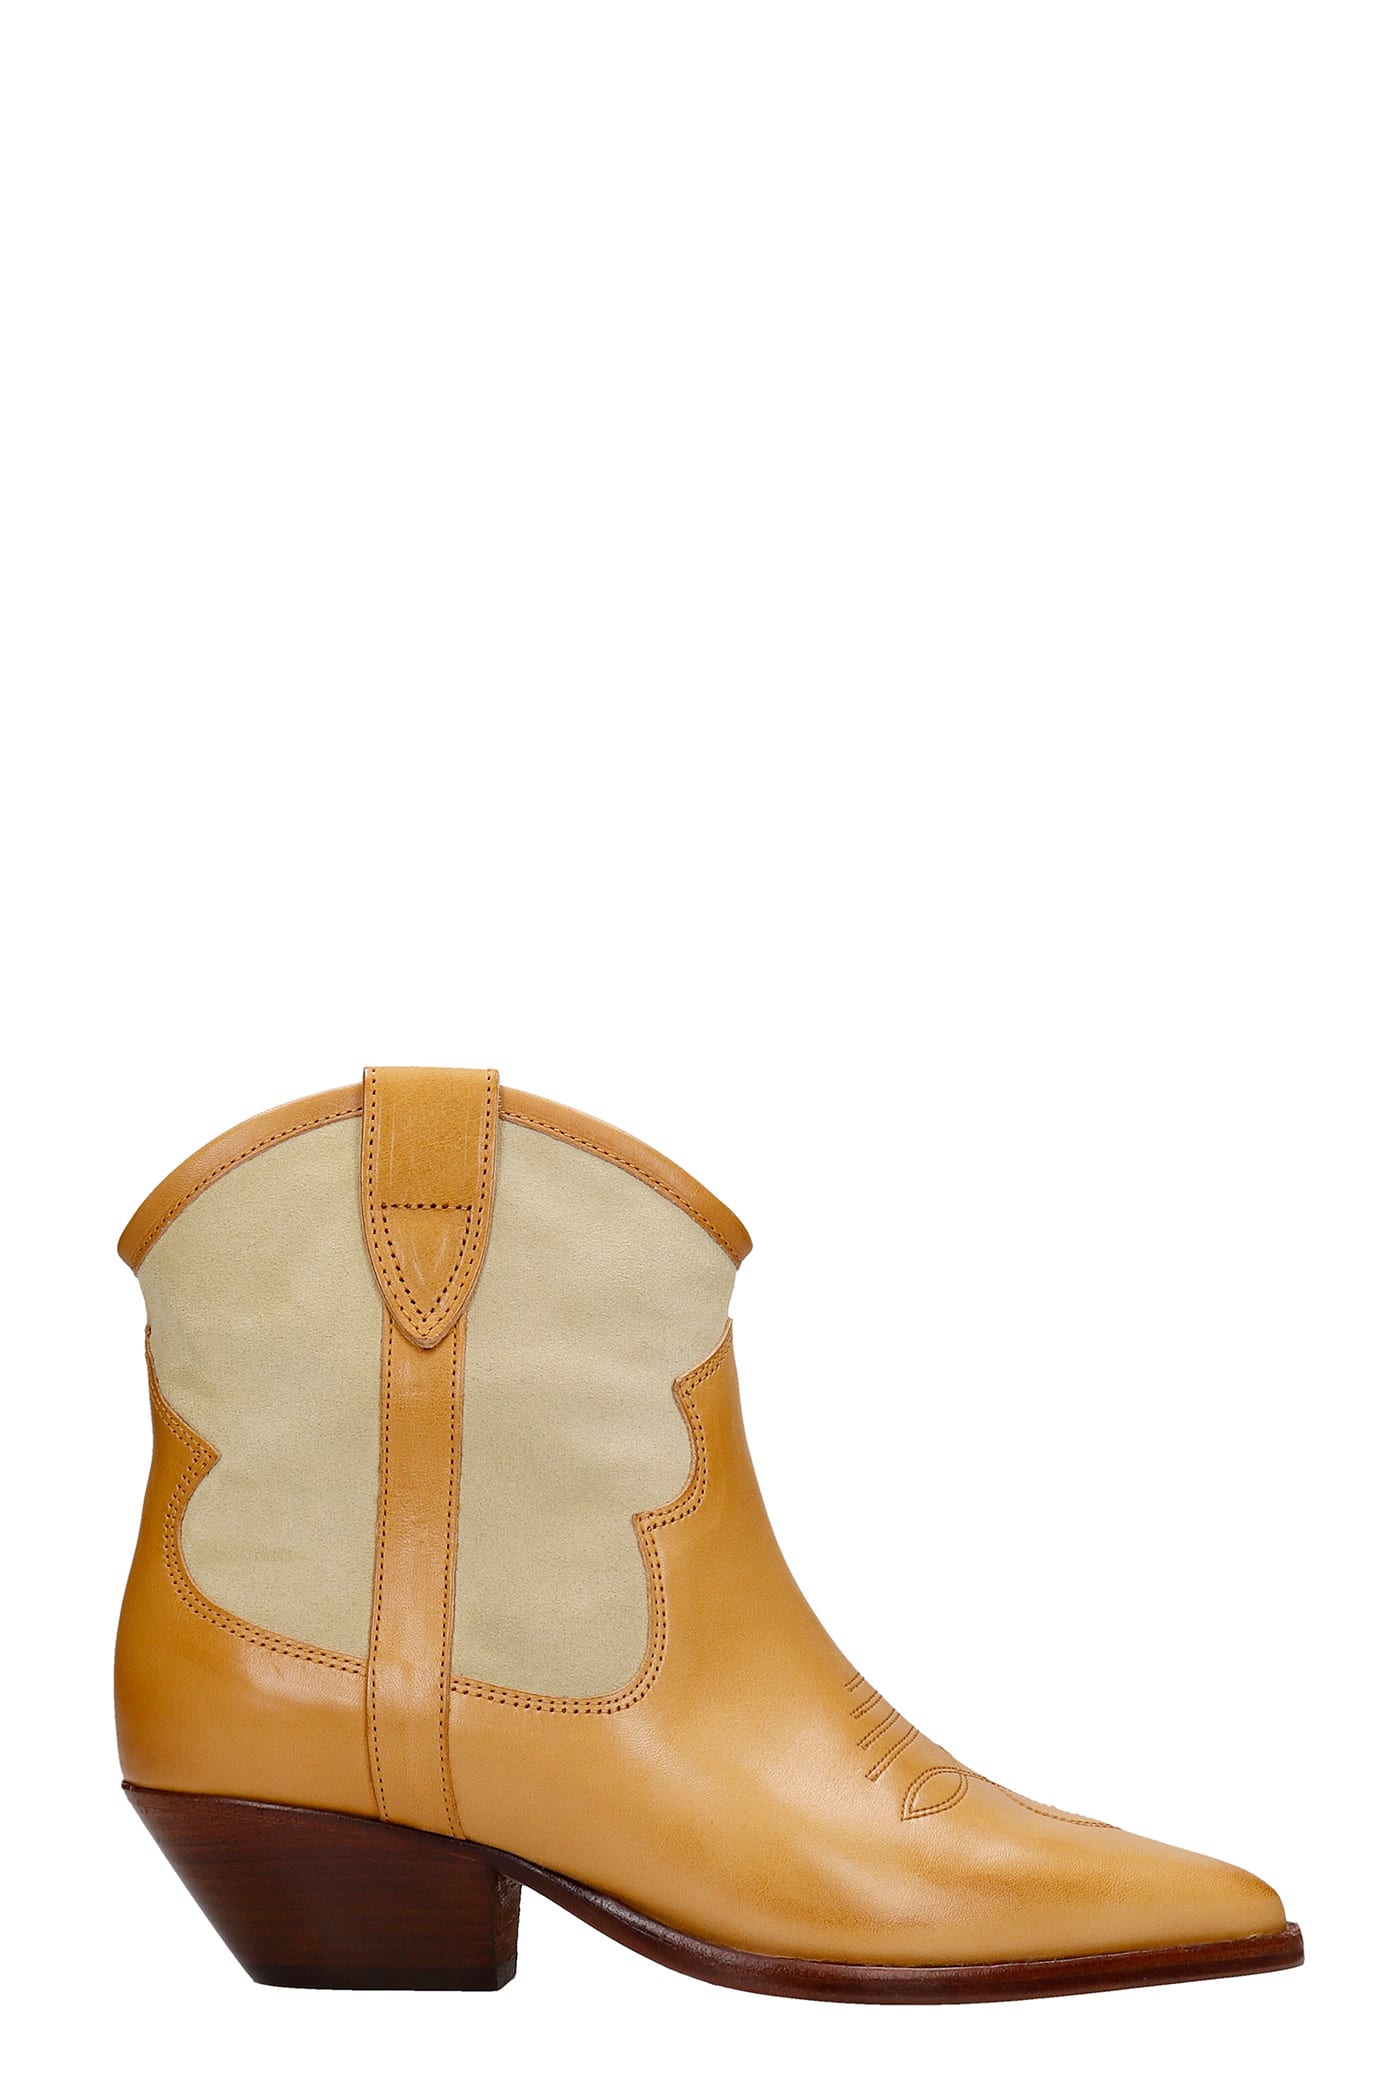 Buy Isabel Marant Demar Texan Ankle Boots In Yellow Suede And Leather online, shop Isabel Marant shoes with free shipping